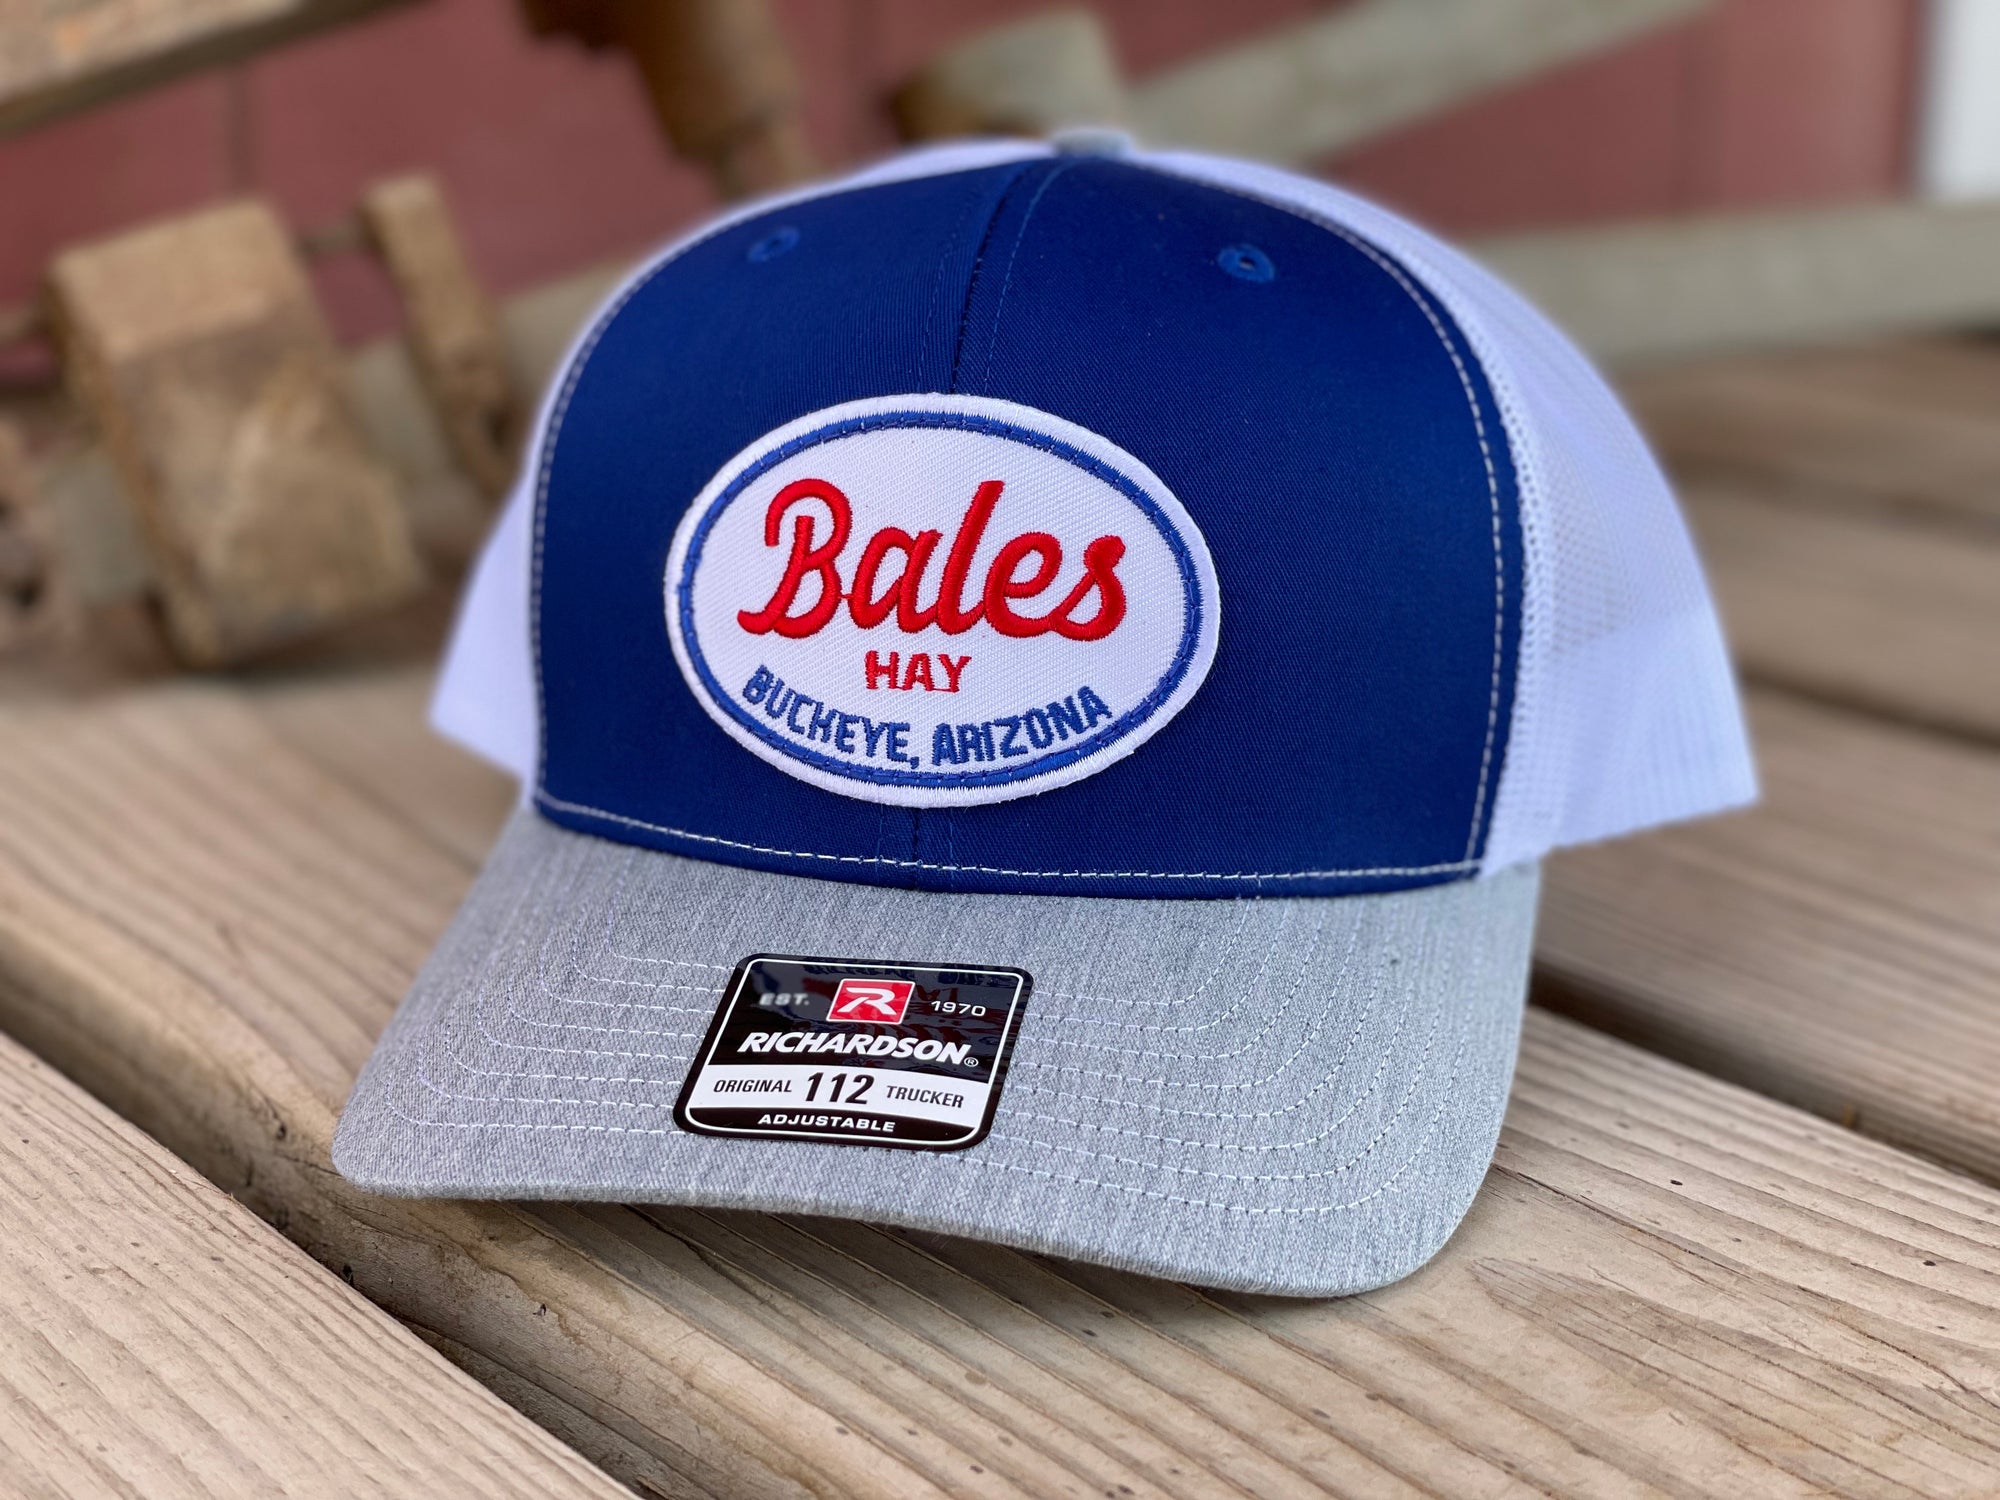 Meet the gold standard of headwear that is known to be top-notch craftsmanship. This hat is both well-made and comfortable to wear that features the our milkman logo on an oval patch. 